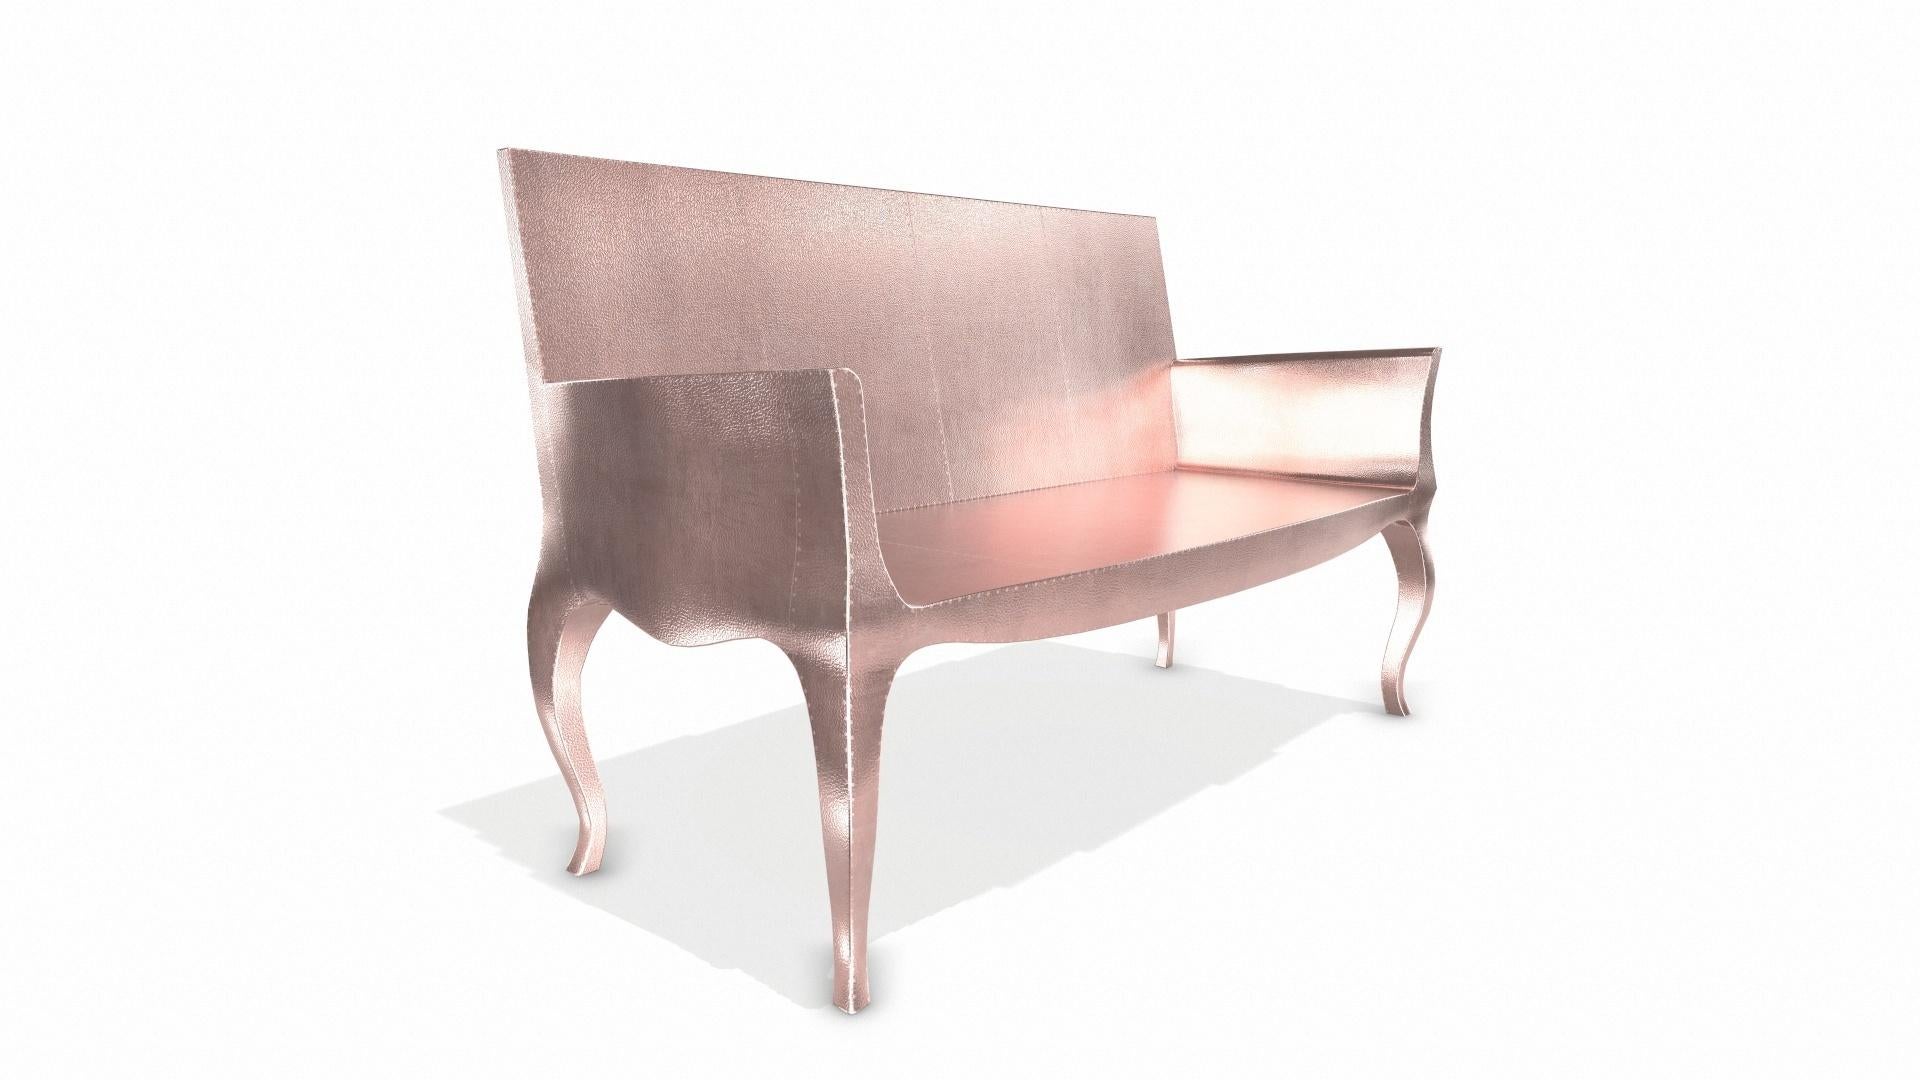 Louise Settee Art Deco Canapes in Fine Hammered Copper by Paul Mathieu In New Condition For Sale In New York, NY